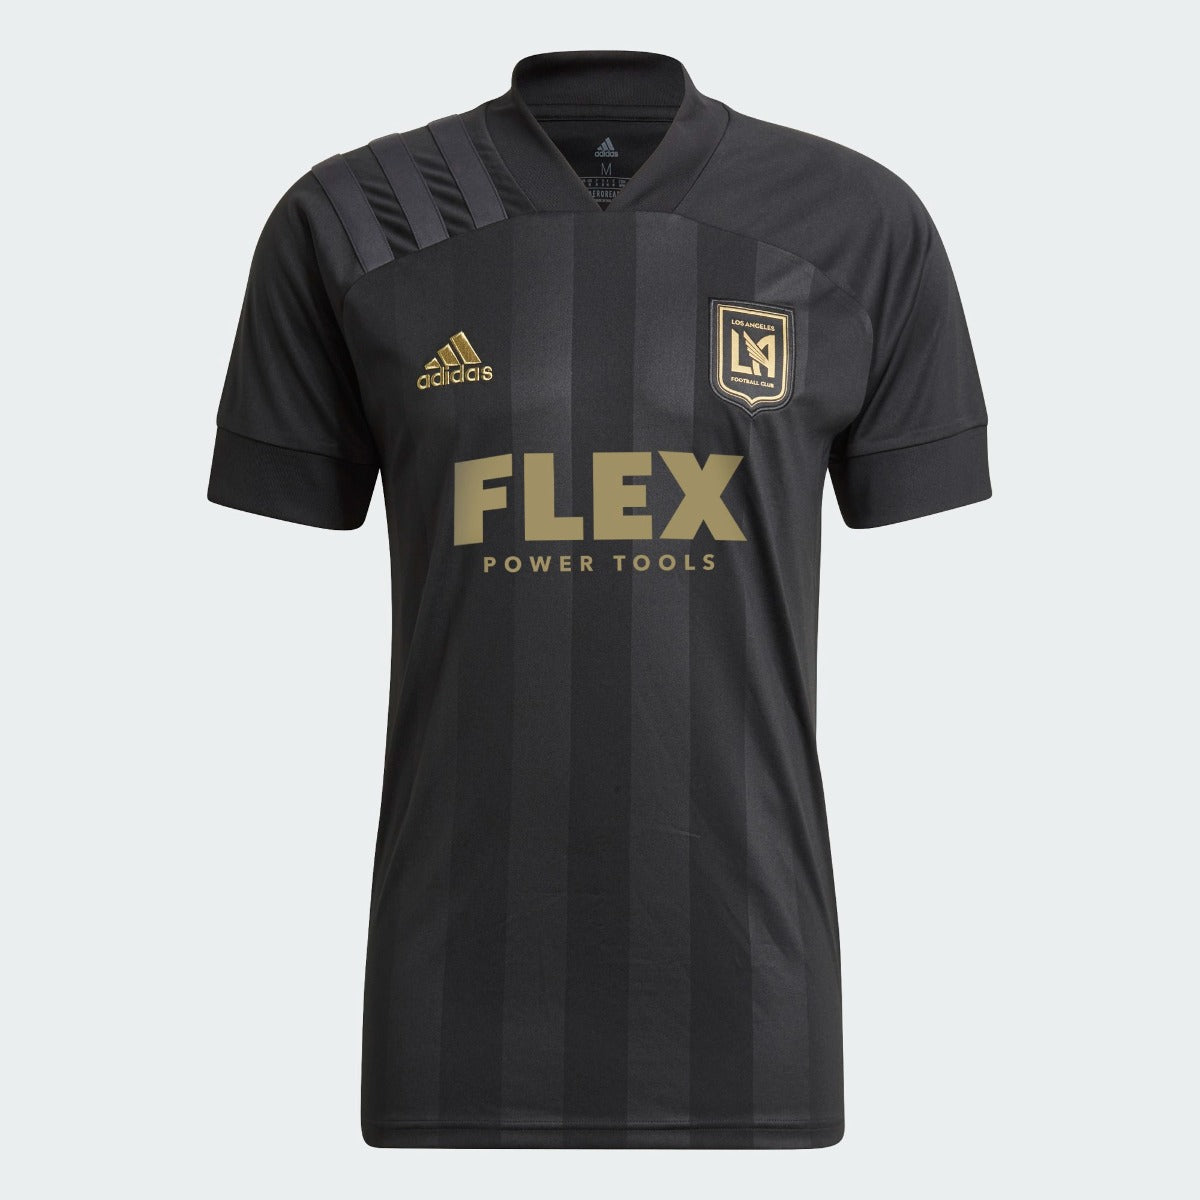 Adidas 2021 LAFC Home jersey - Black-Gold (Front)